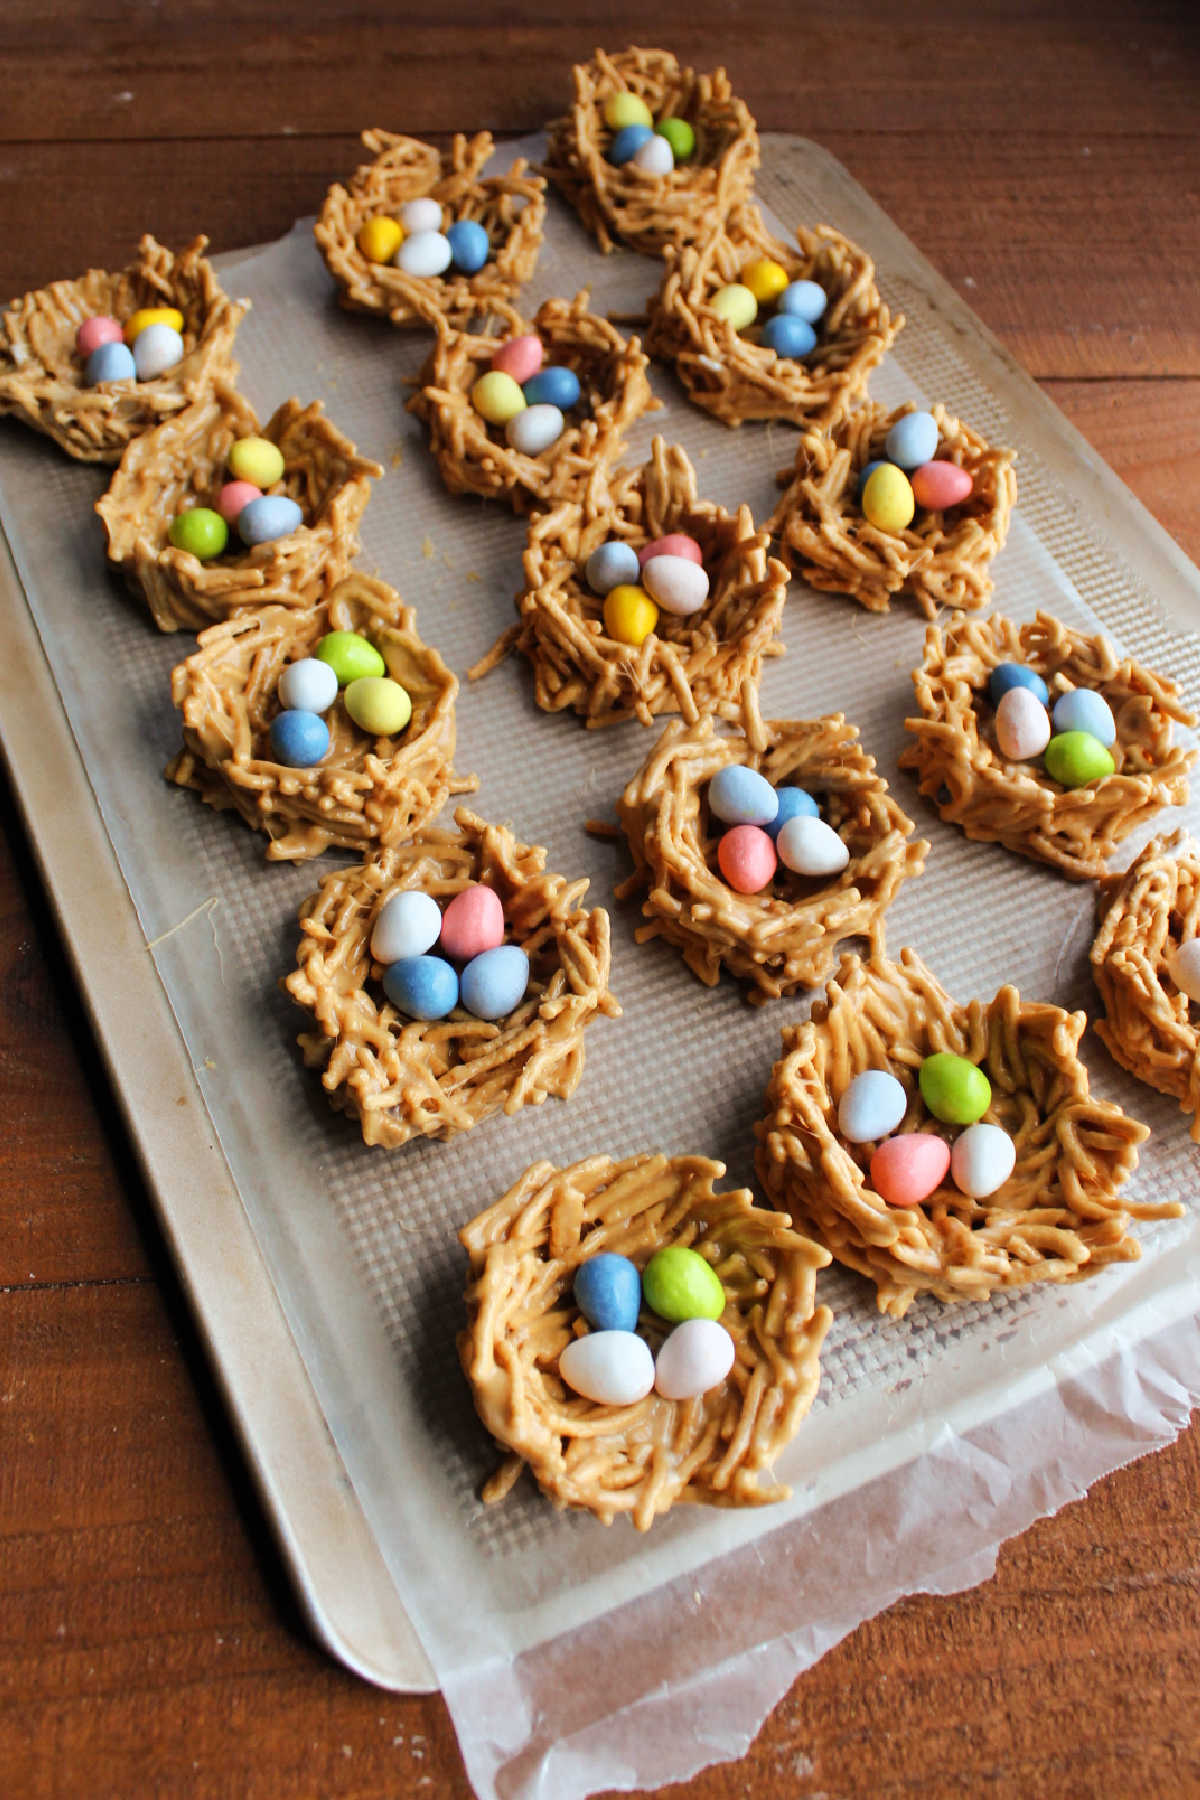 Tray of chow mein nests filled with chocolate and peanut butter candy eggs. 